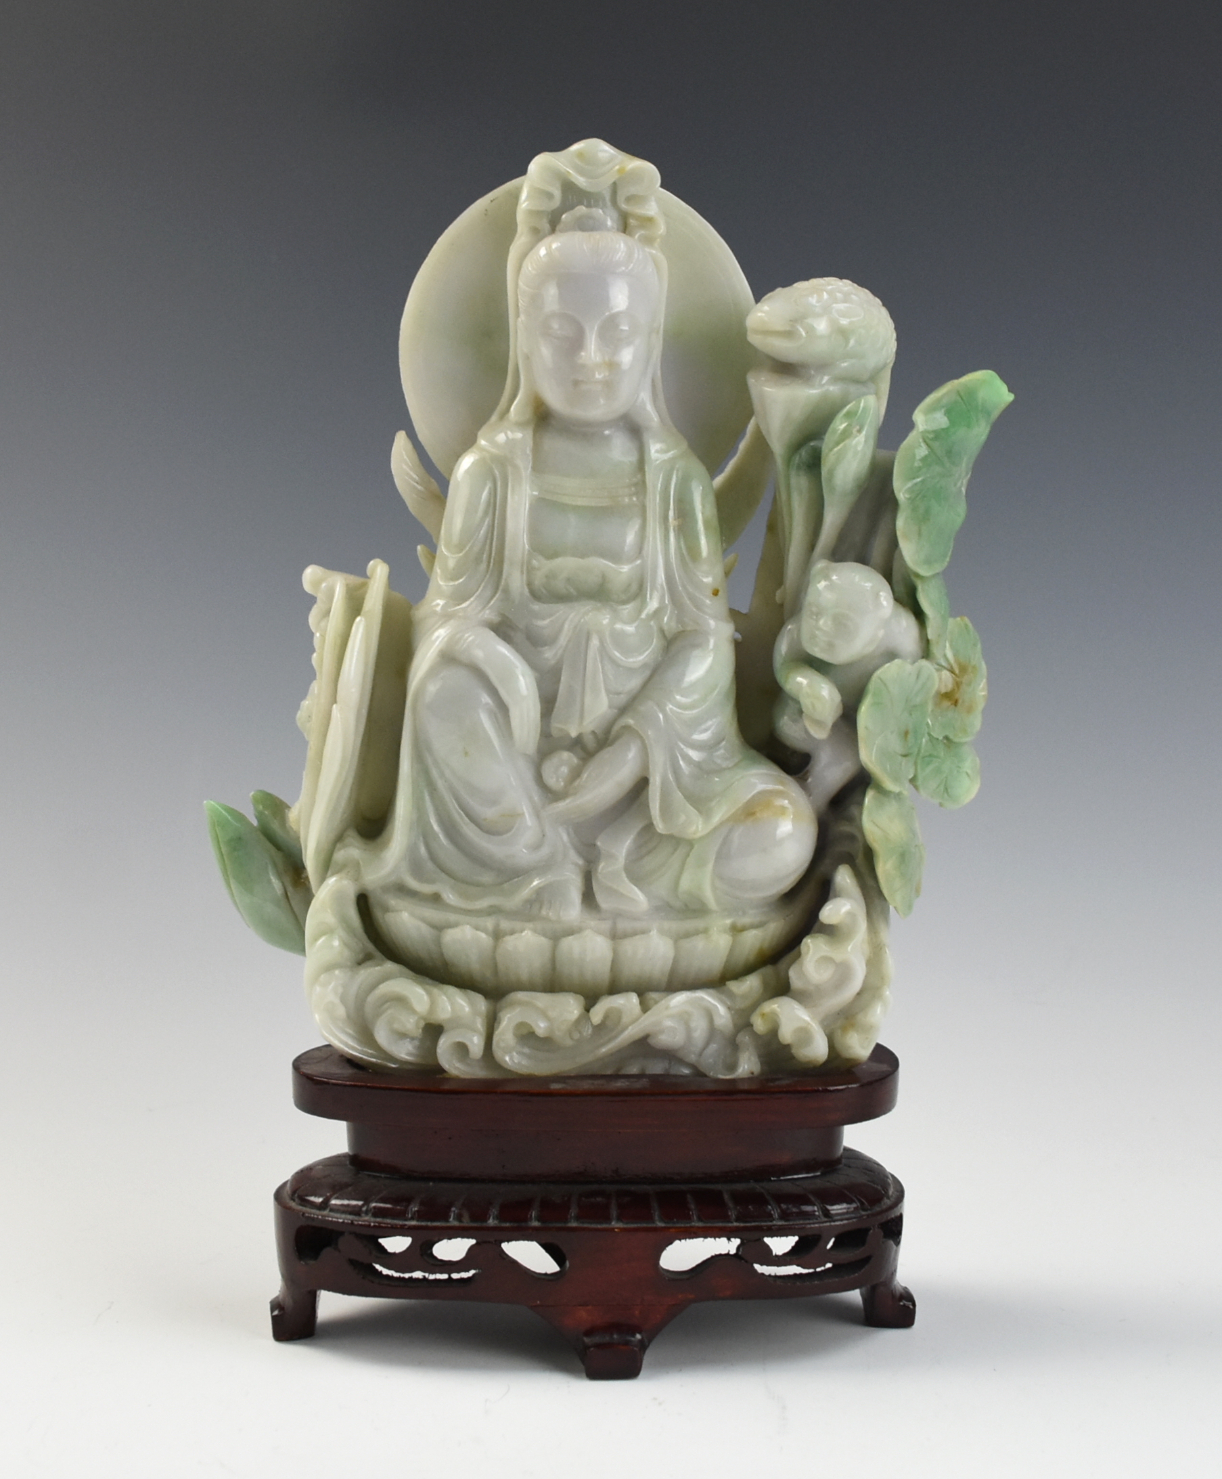 CHINESE JADEITE GUANYIN WITH WOOD 2ced44